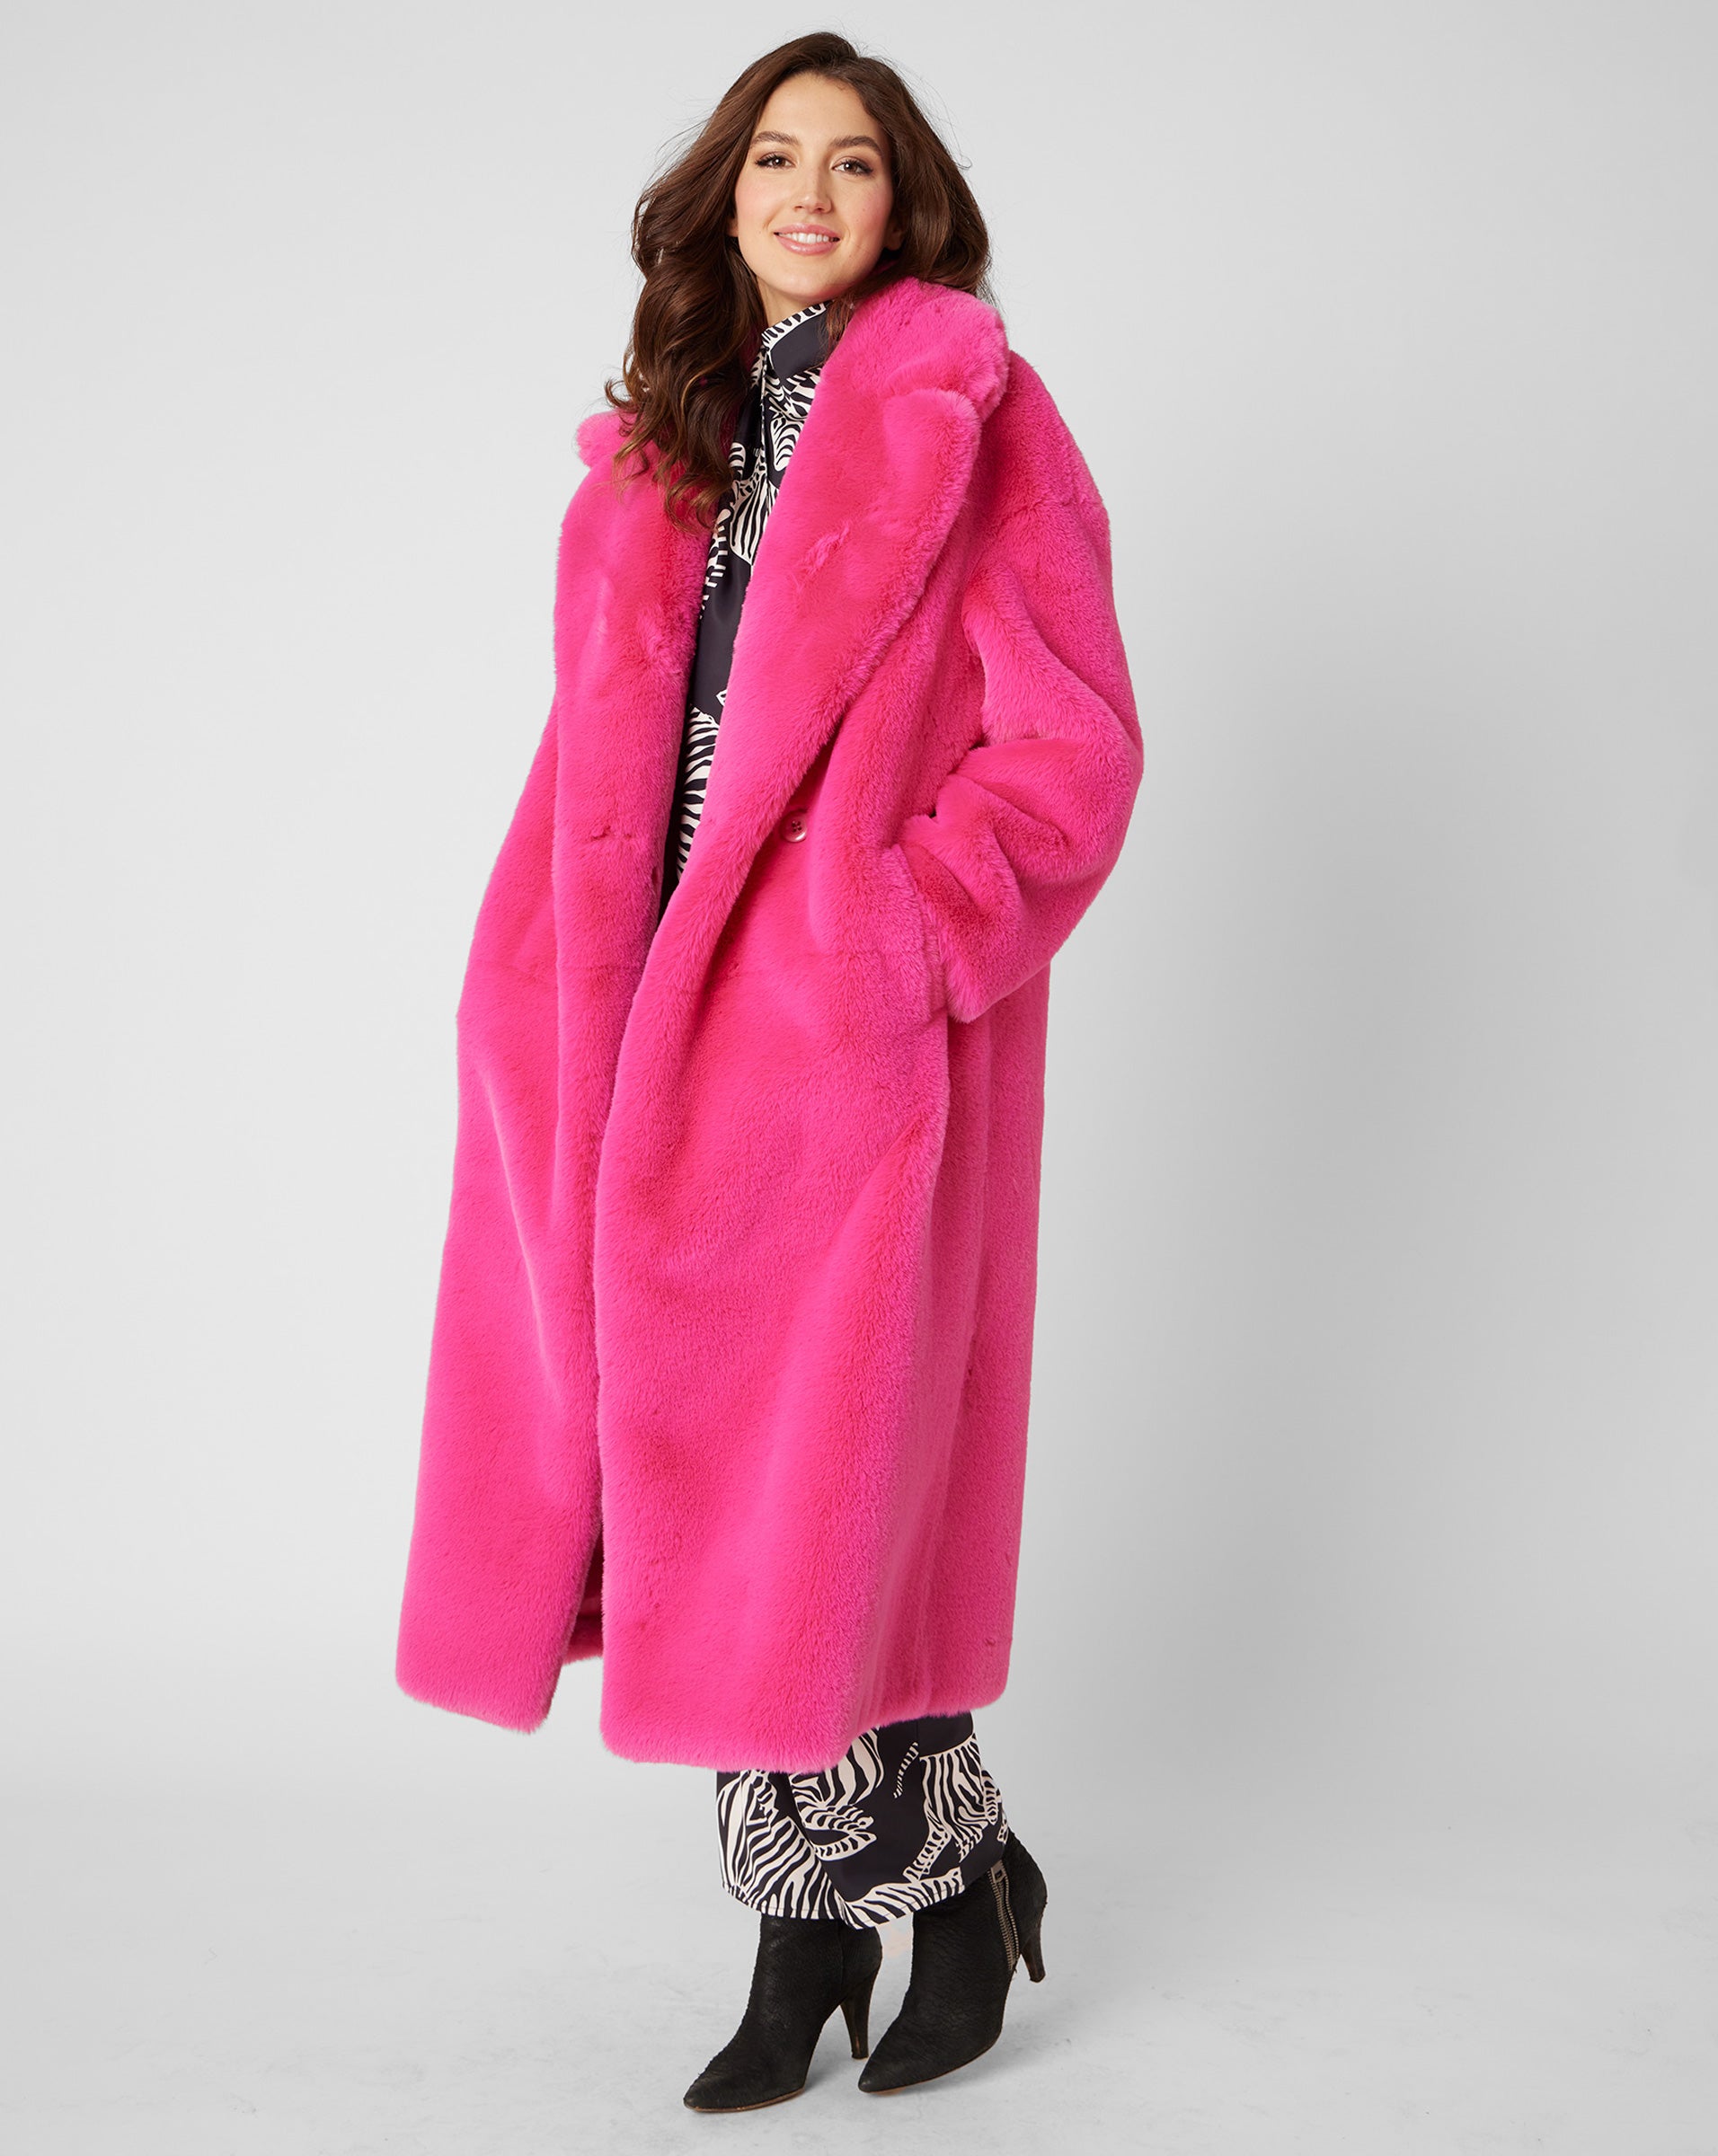 52,825 Pink Fur Fashion Images, Stock Photos, 3D objects, & Vectors